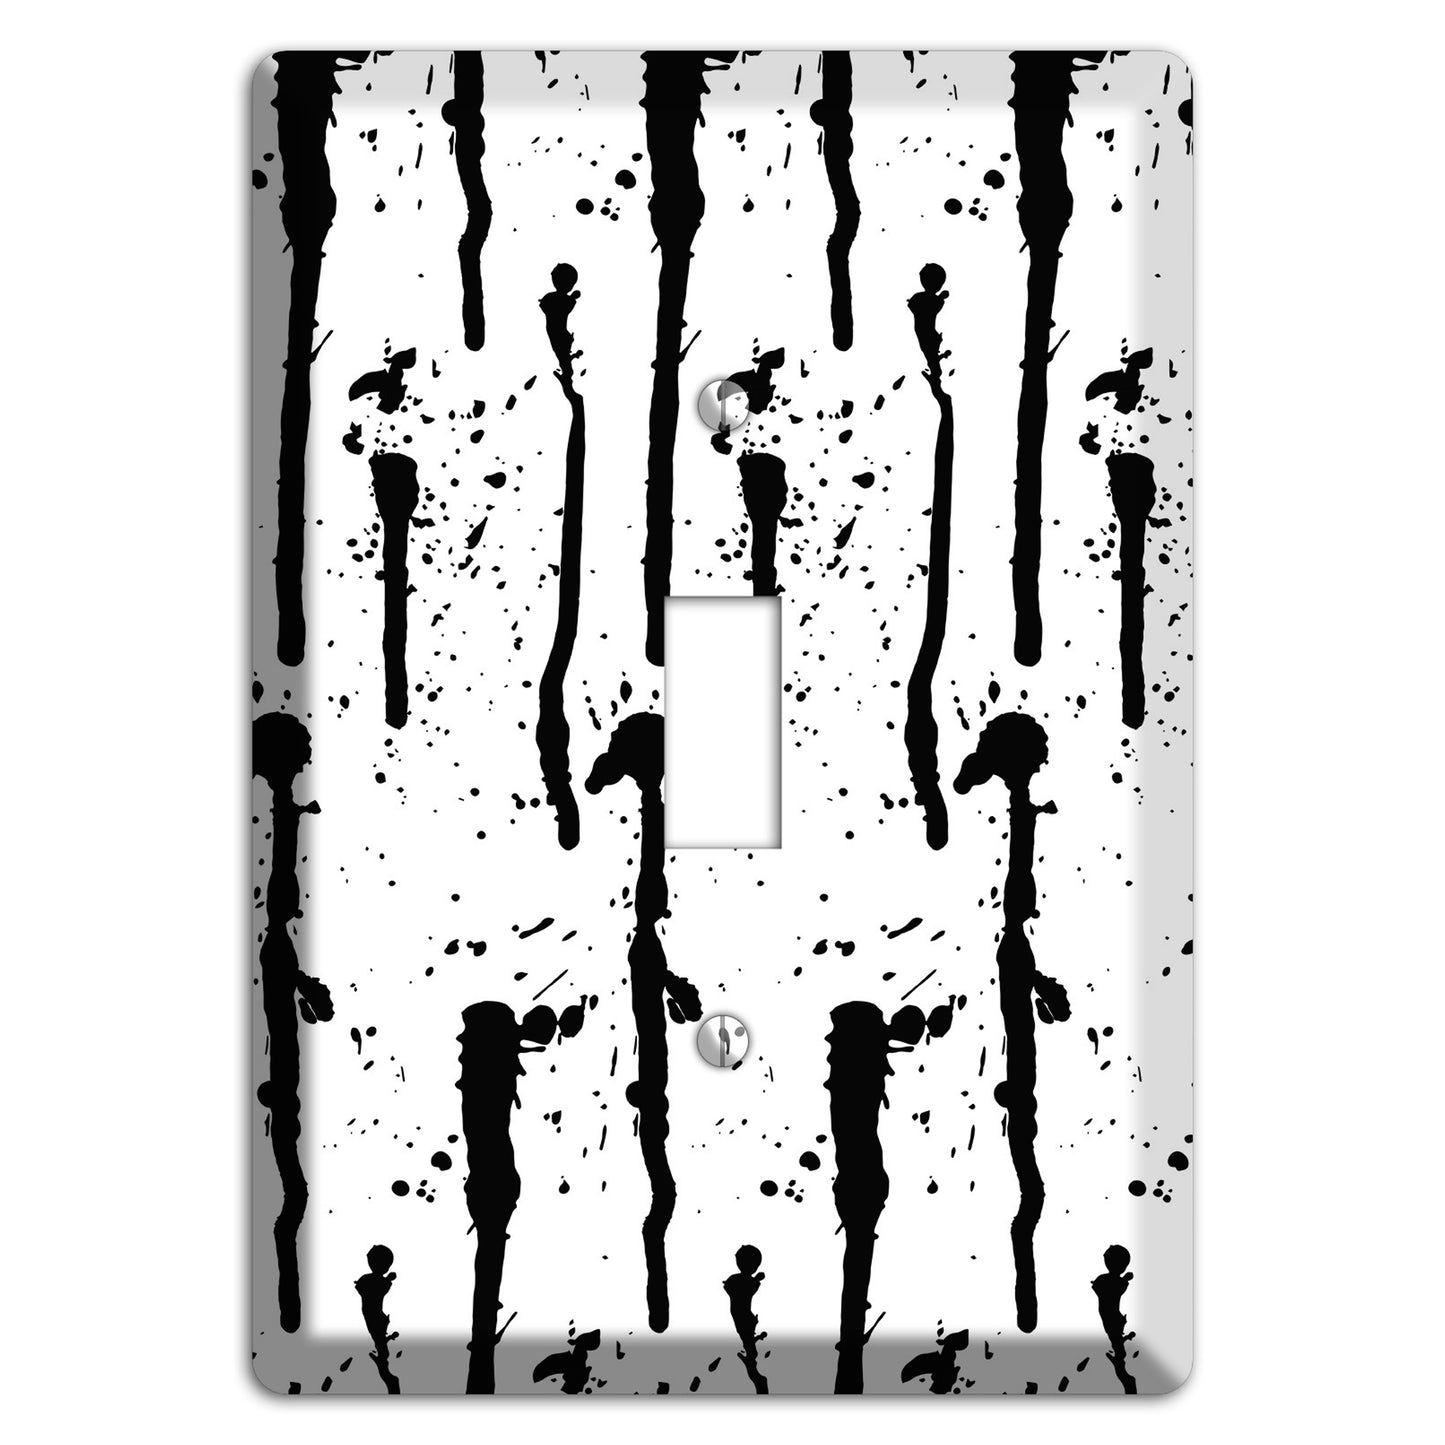 Ink Drips 9 Cover Plates